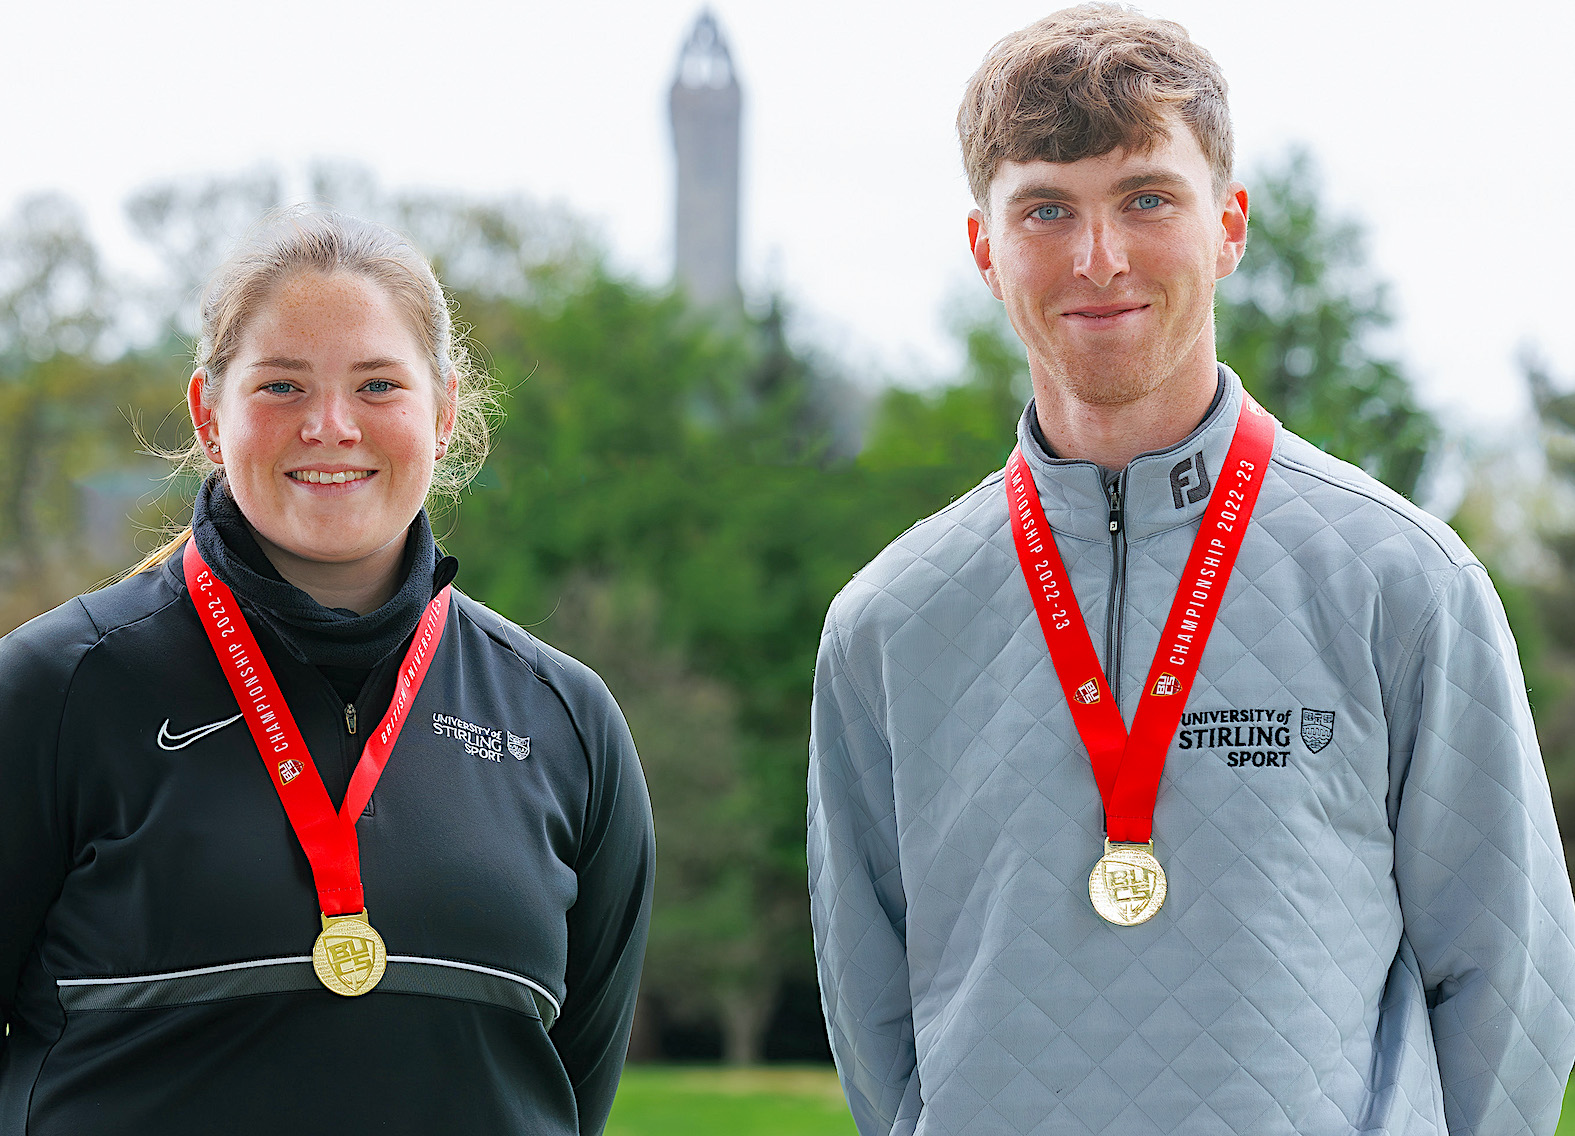 BUCS Tour champions Lorna McClymont and George Cannon